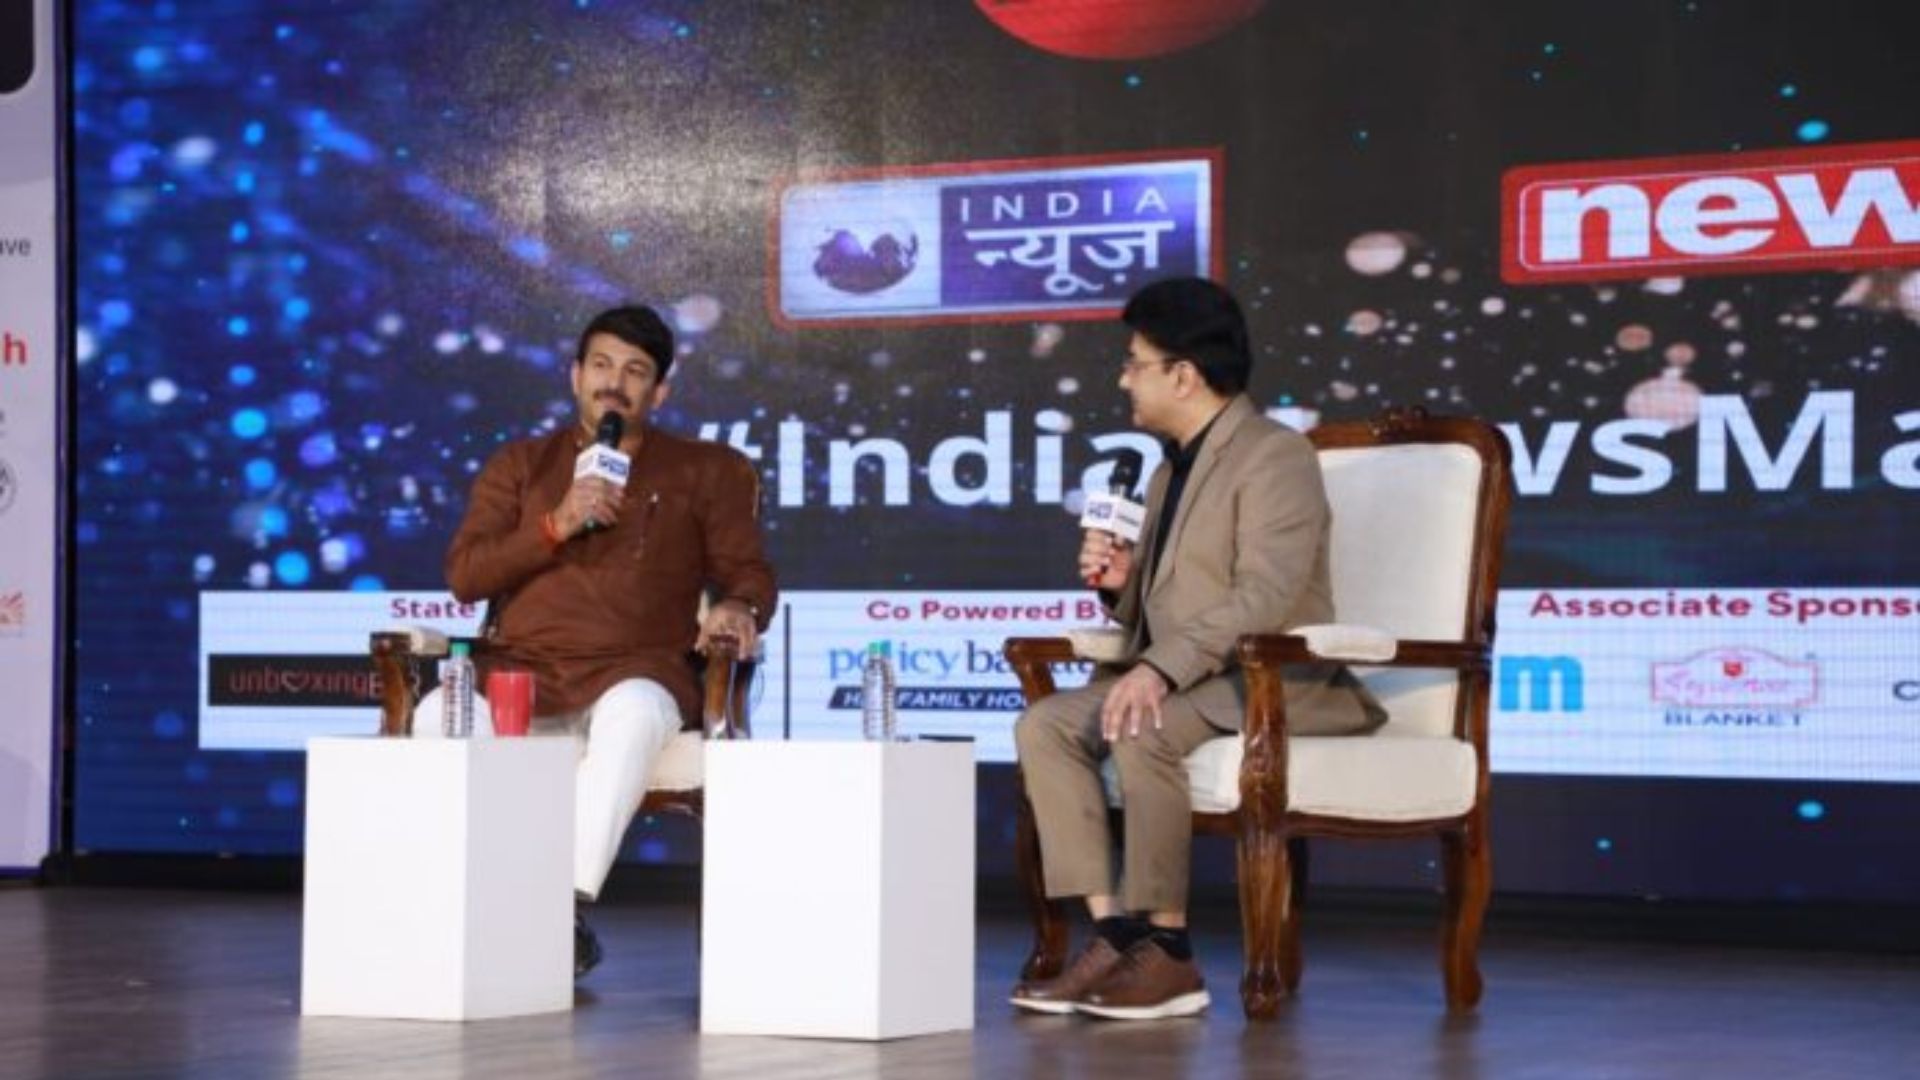 India News Manch 2023: Manoj Tiwari comments on triumph in three states, offers insights on CM faces